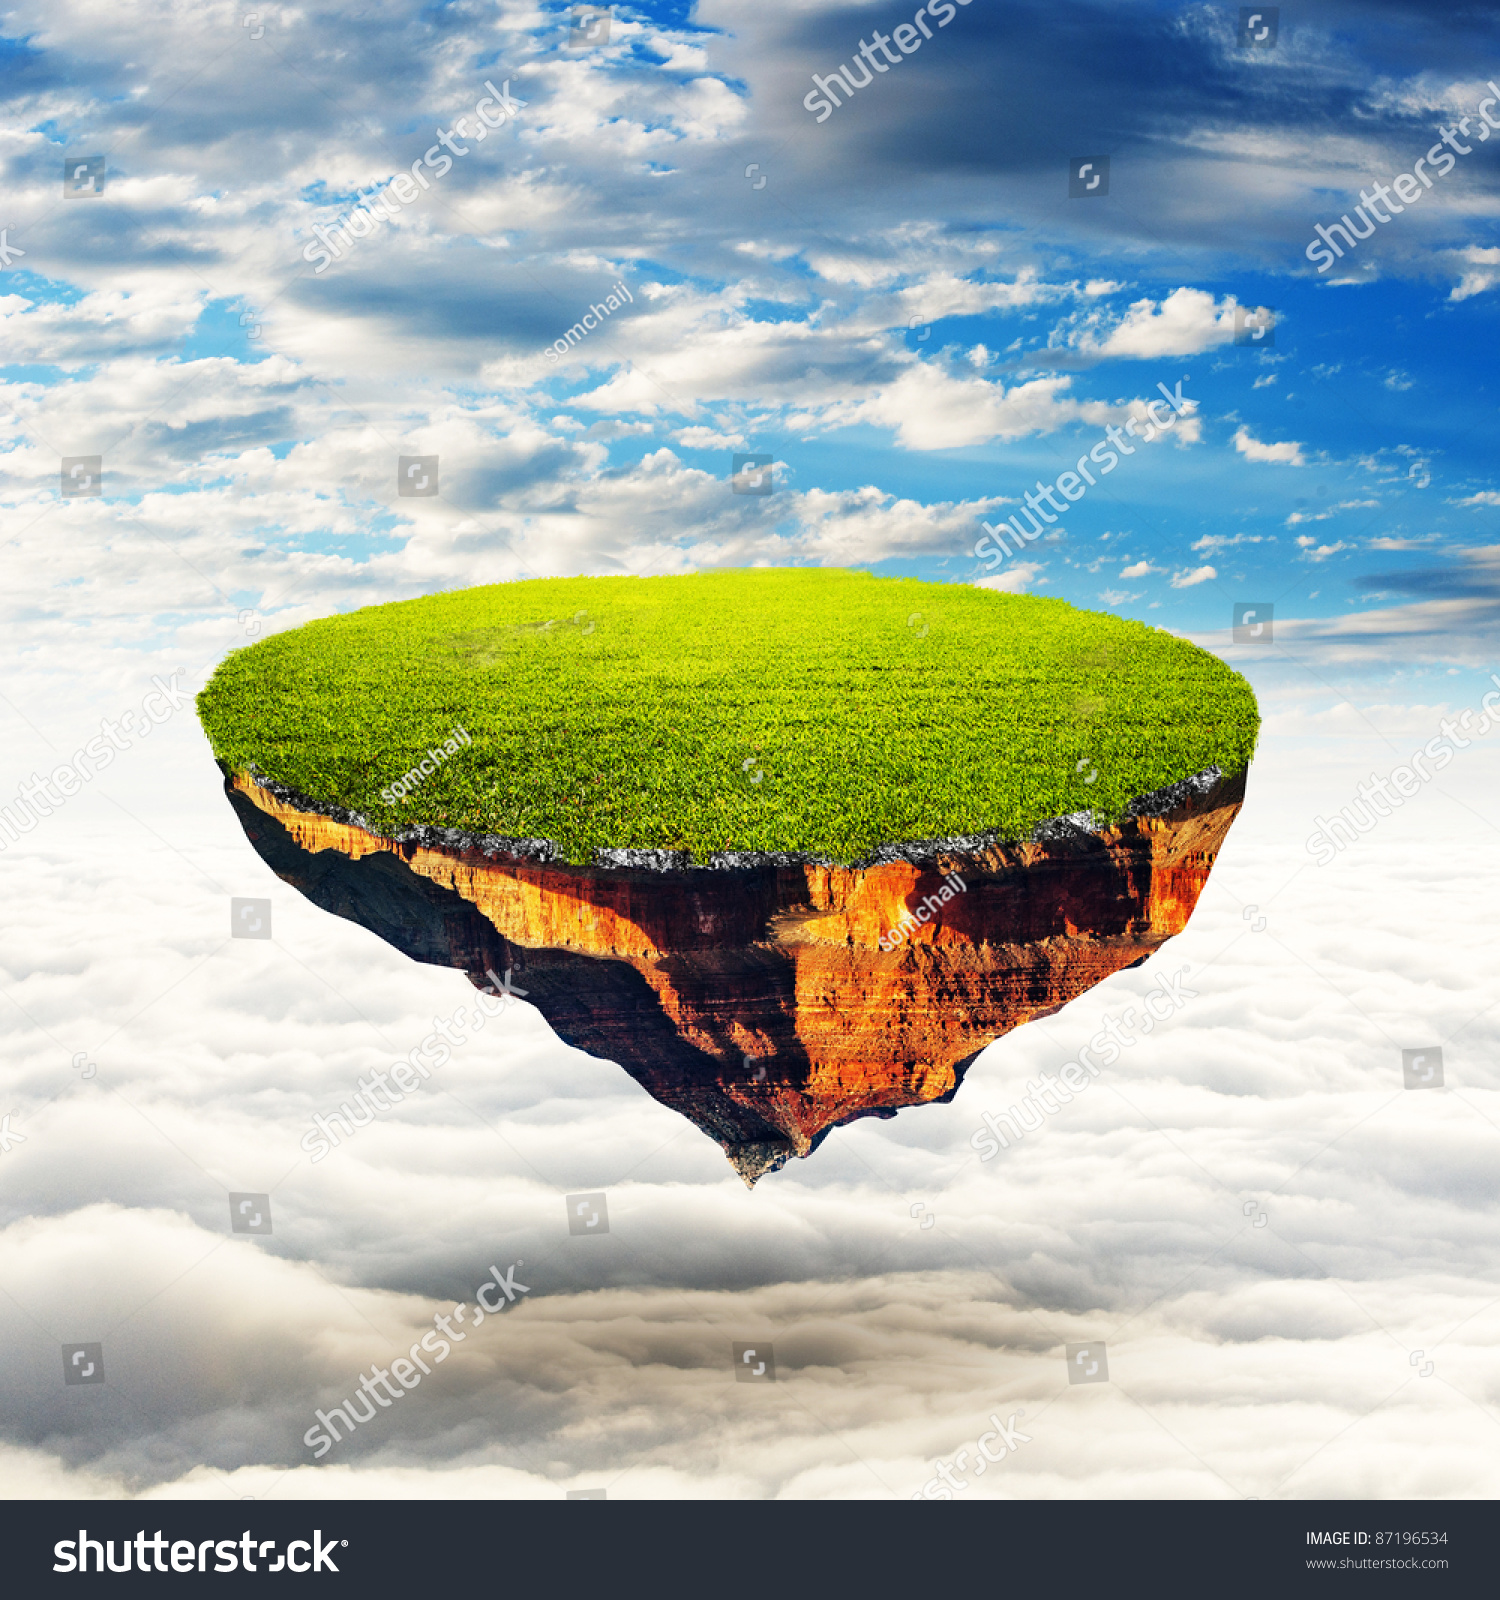 stock-photo-floating-planet-a-piece-of-land-in-the-air-detailed-grass-ground-on-white-fog-with-sky-87196534.jpg